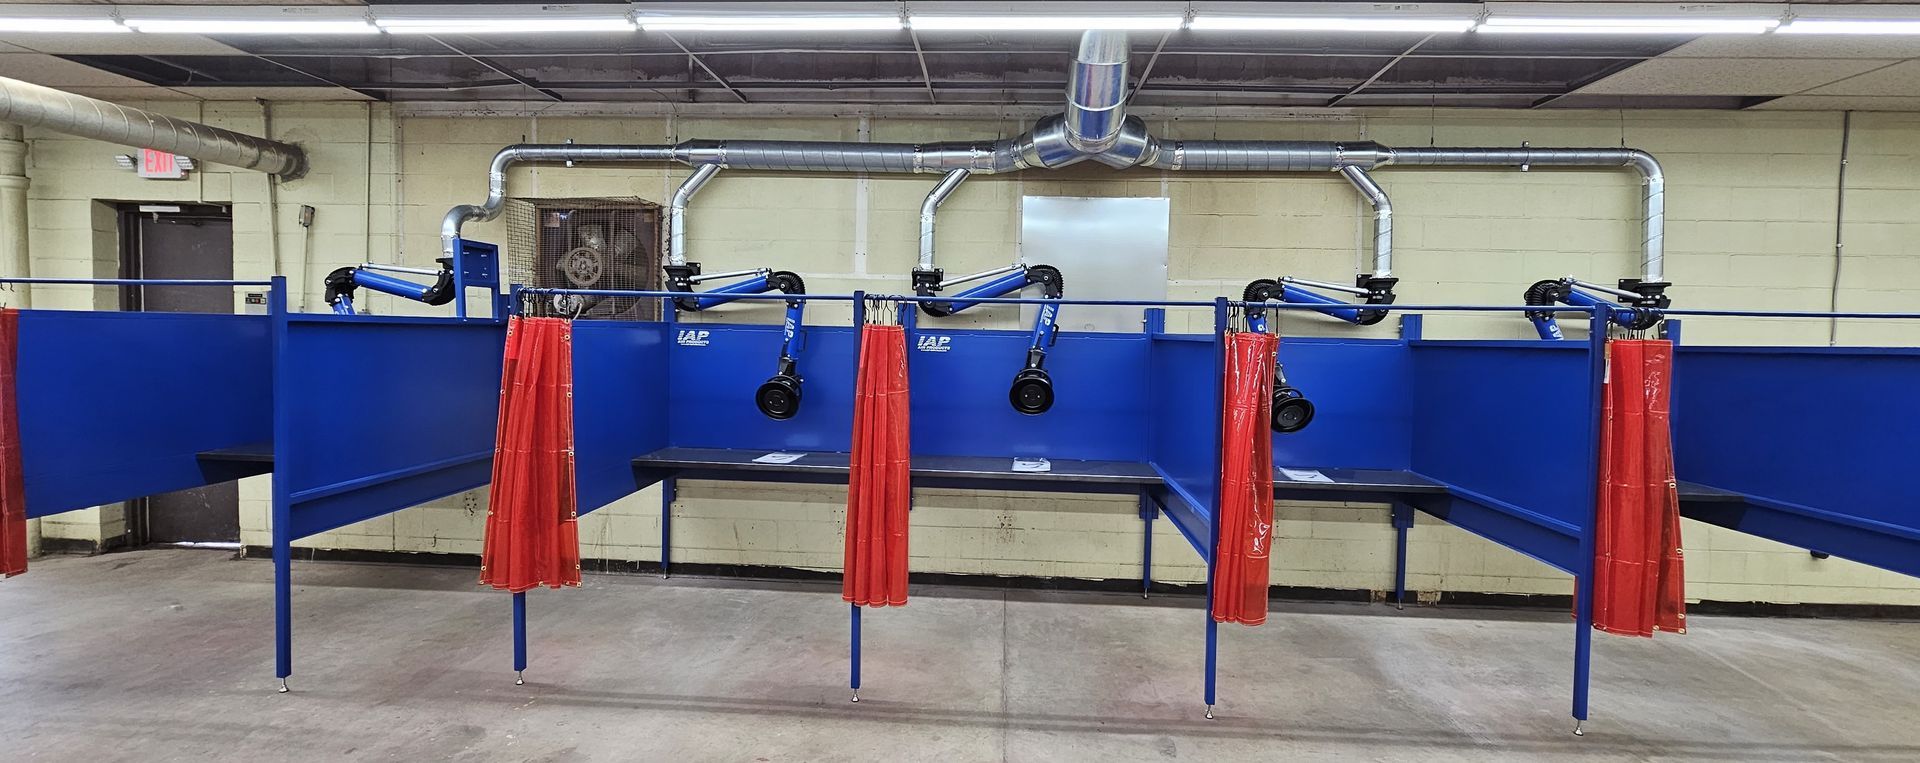 Weld booths for education